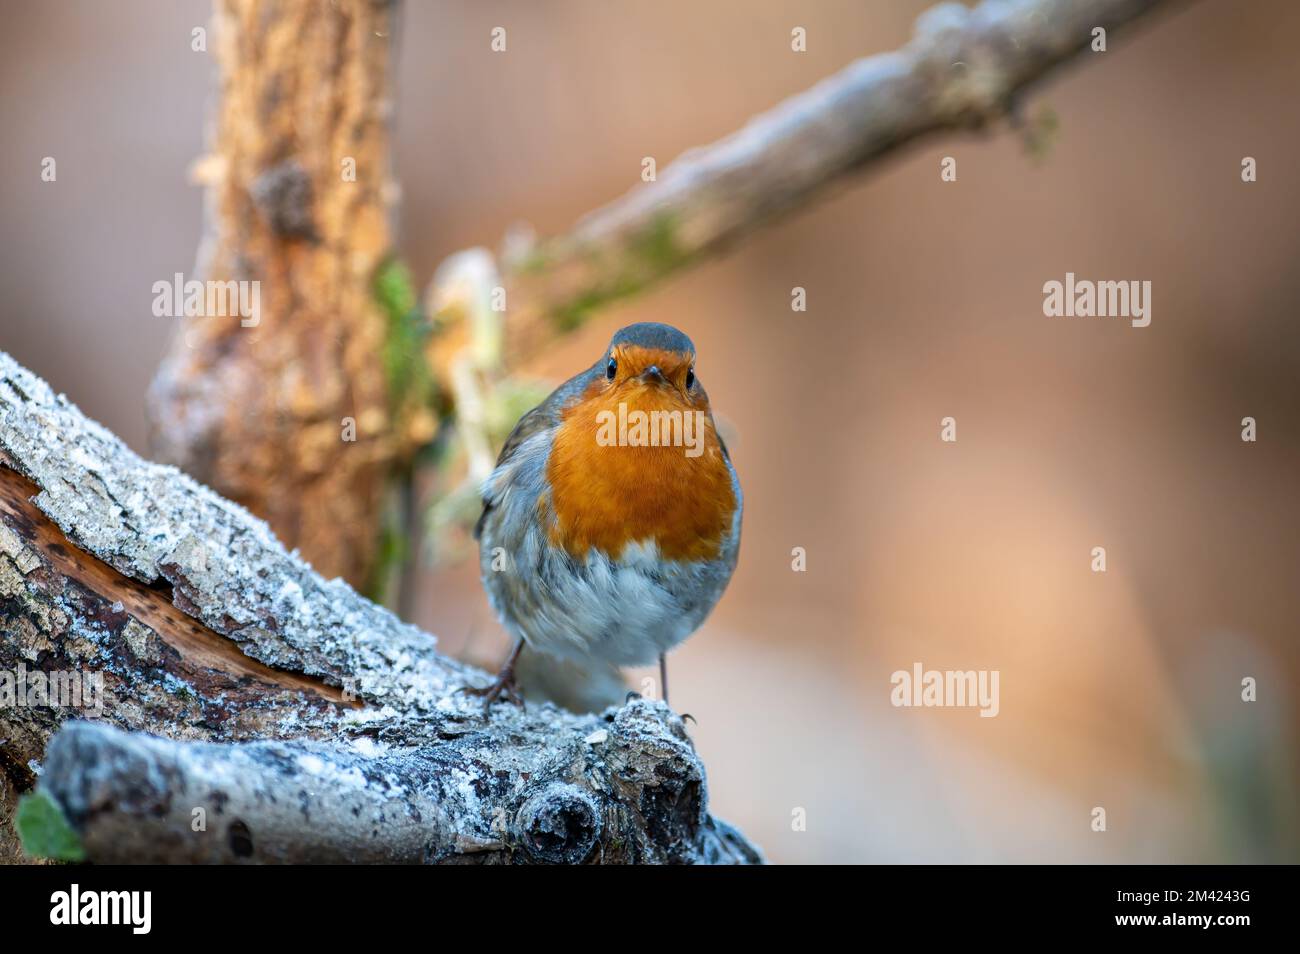 Robin, Erithacus rubecula, perched on a frosty branch, looking ahead Stock Photo